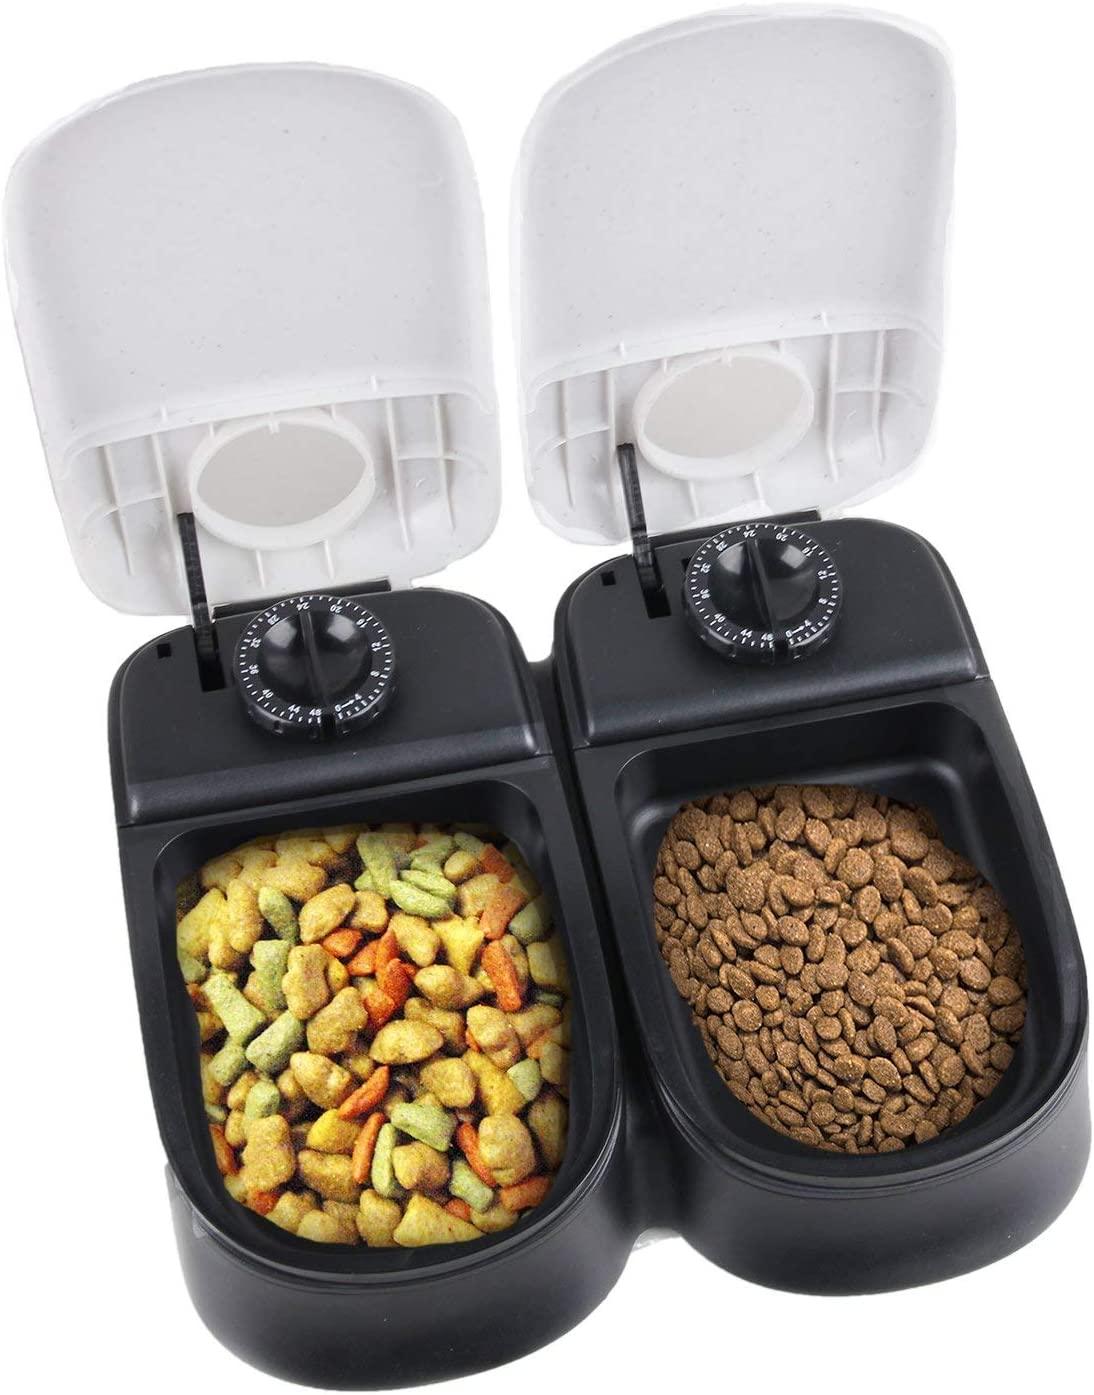 PAWISE Automatic Pet Feeder 2-Meal Automatic Food for Dogs Cats - Pets Villa